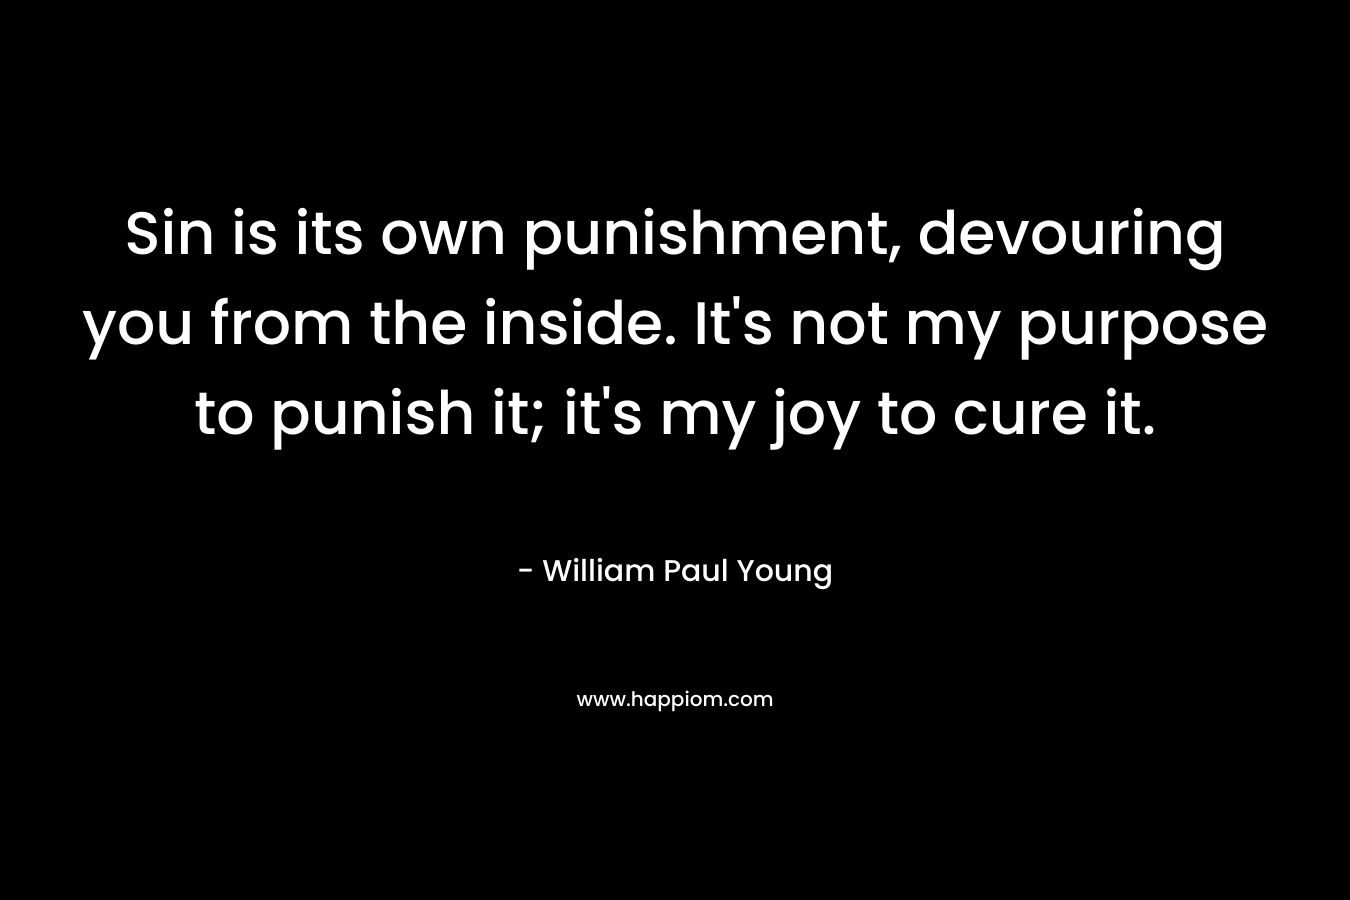 Sin is its own punishment, devouring you from the inside. It's not my purpose to punish it; it's my joy to cure it.